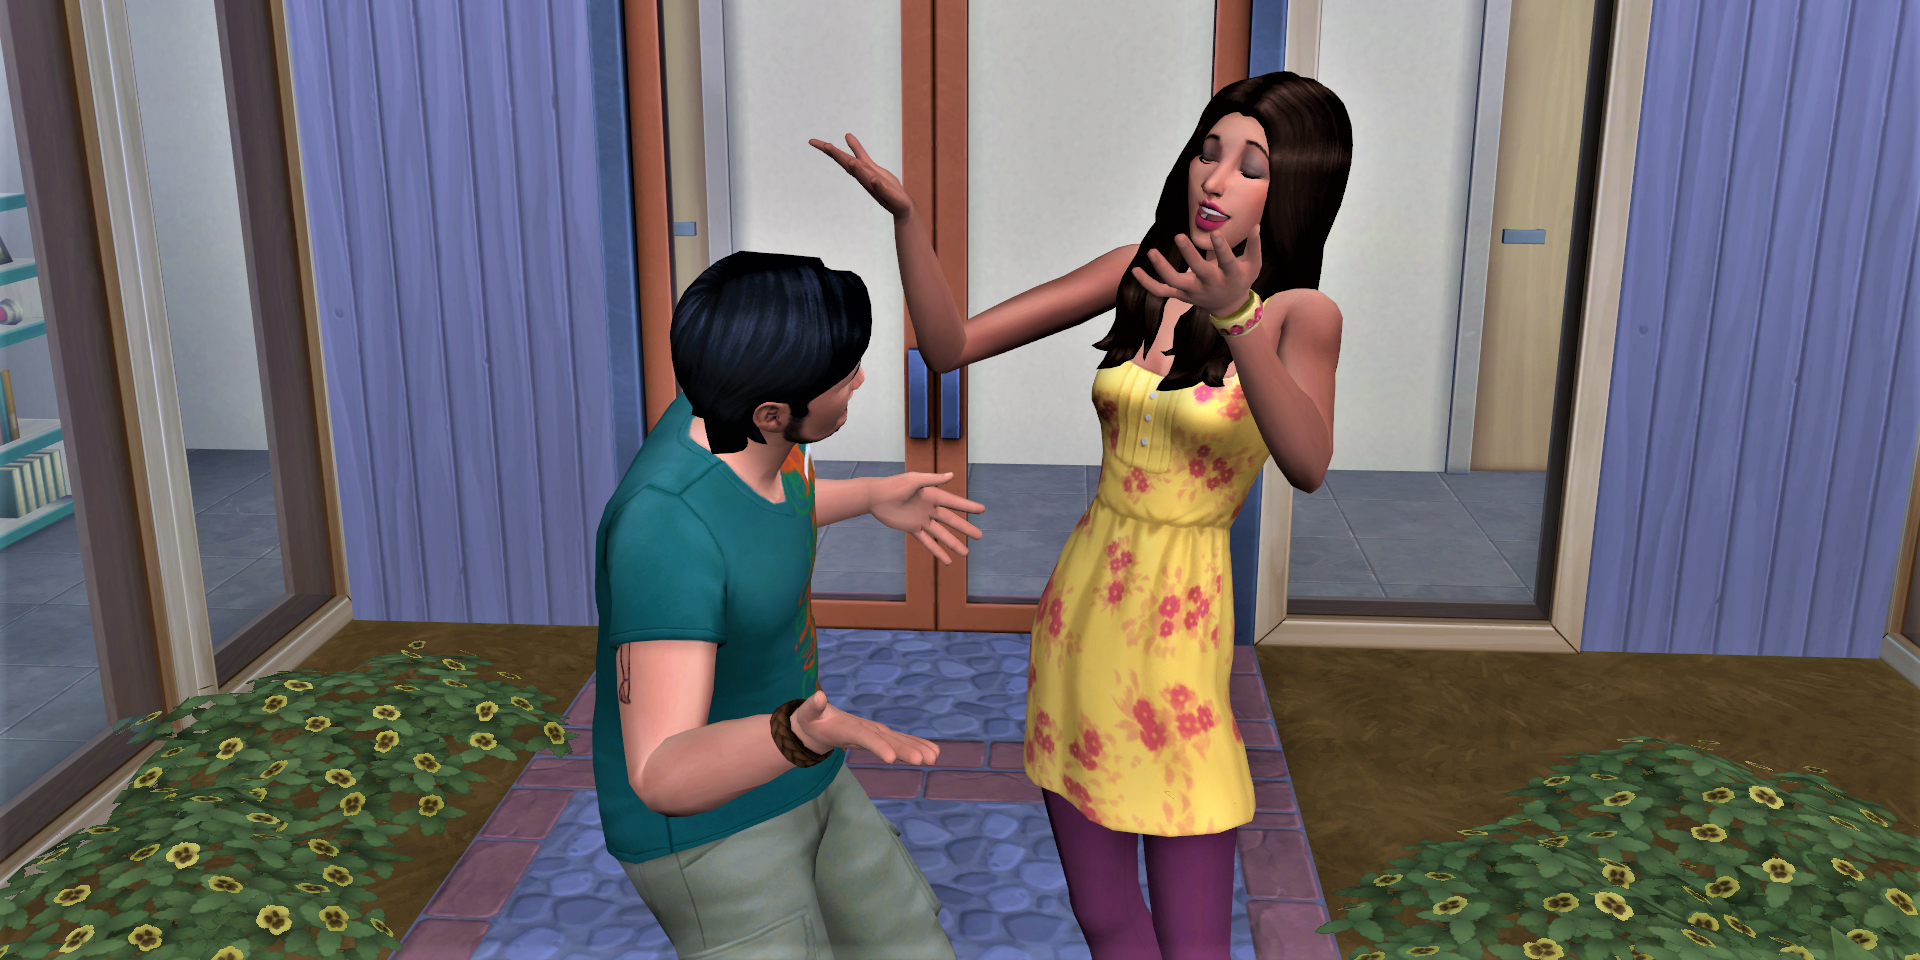 Two members of the Roomie household chatting in The Sims 4